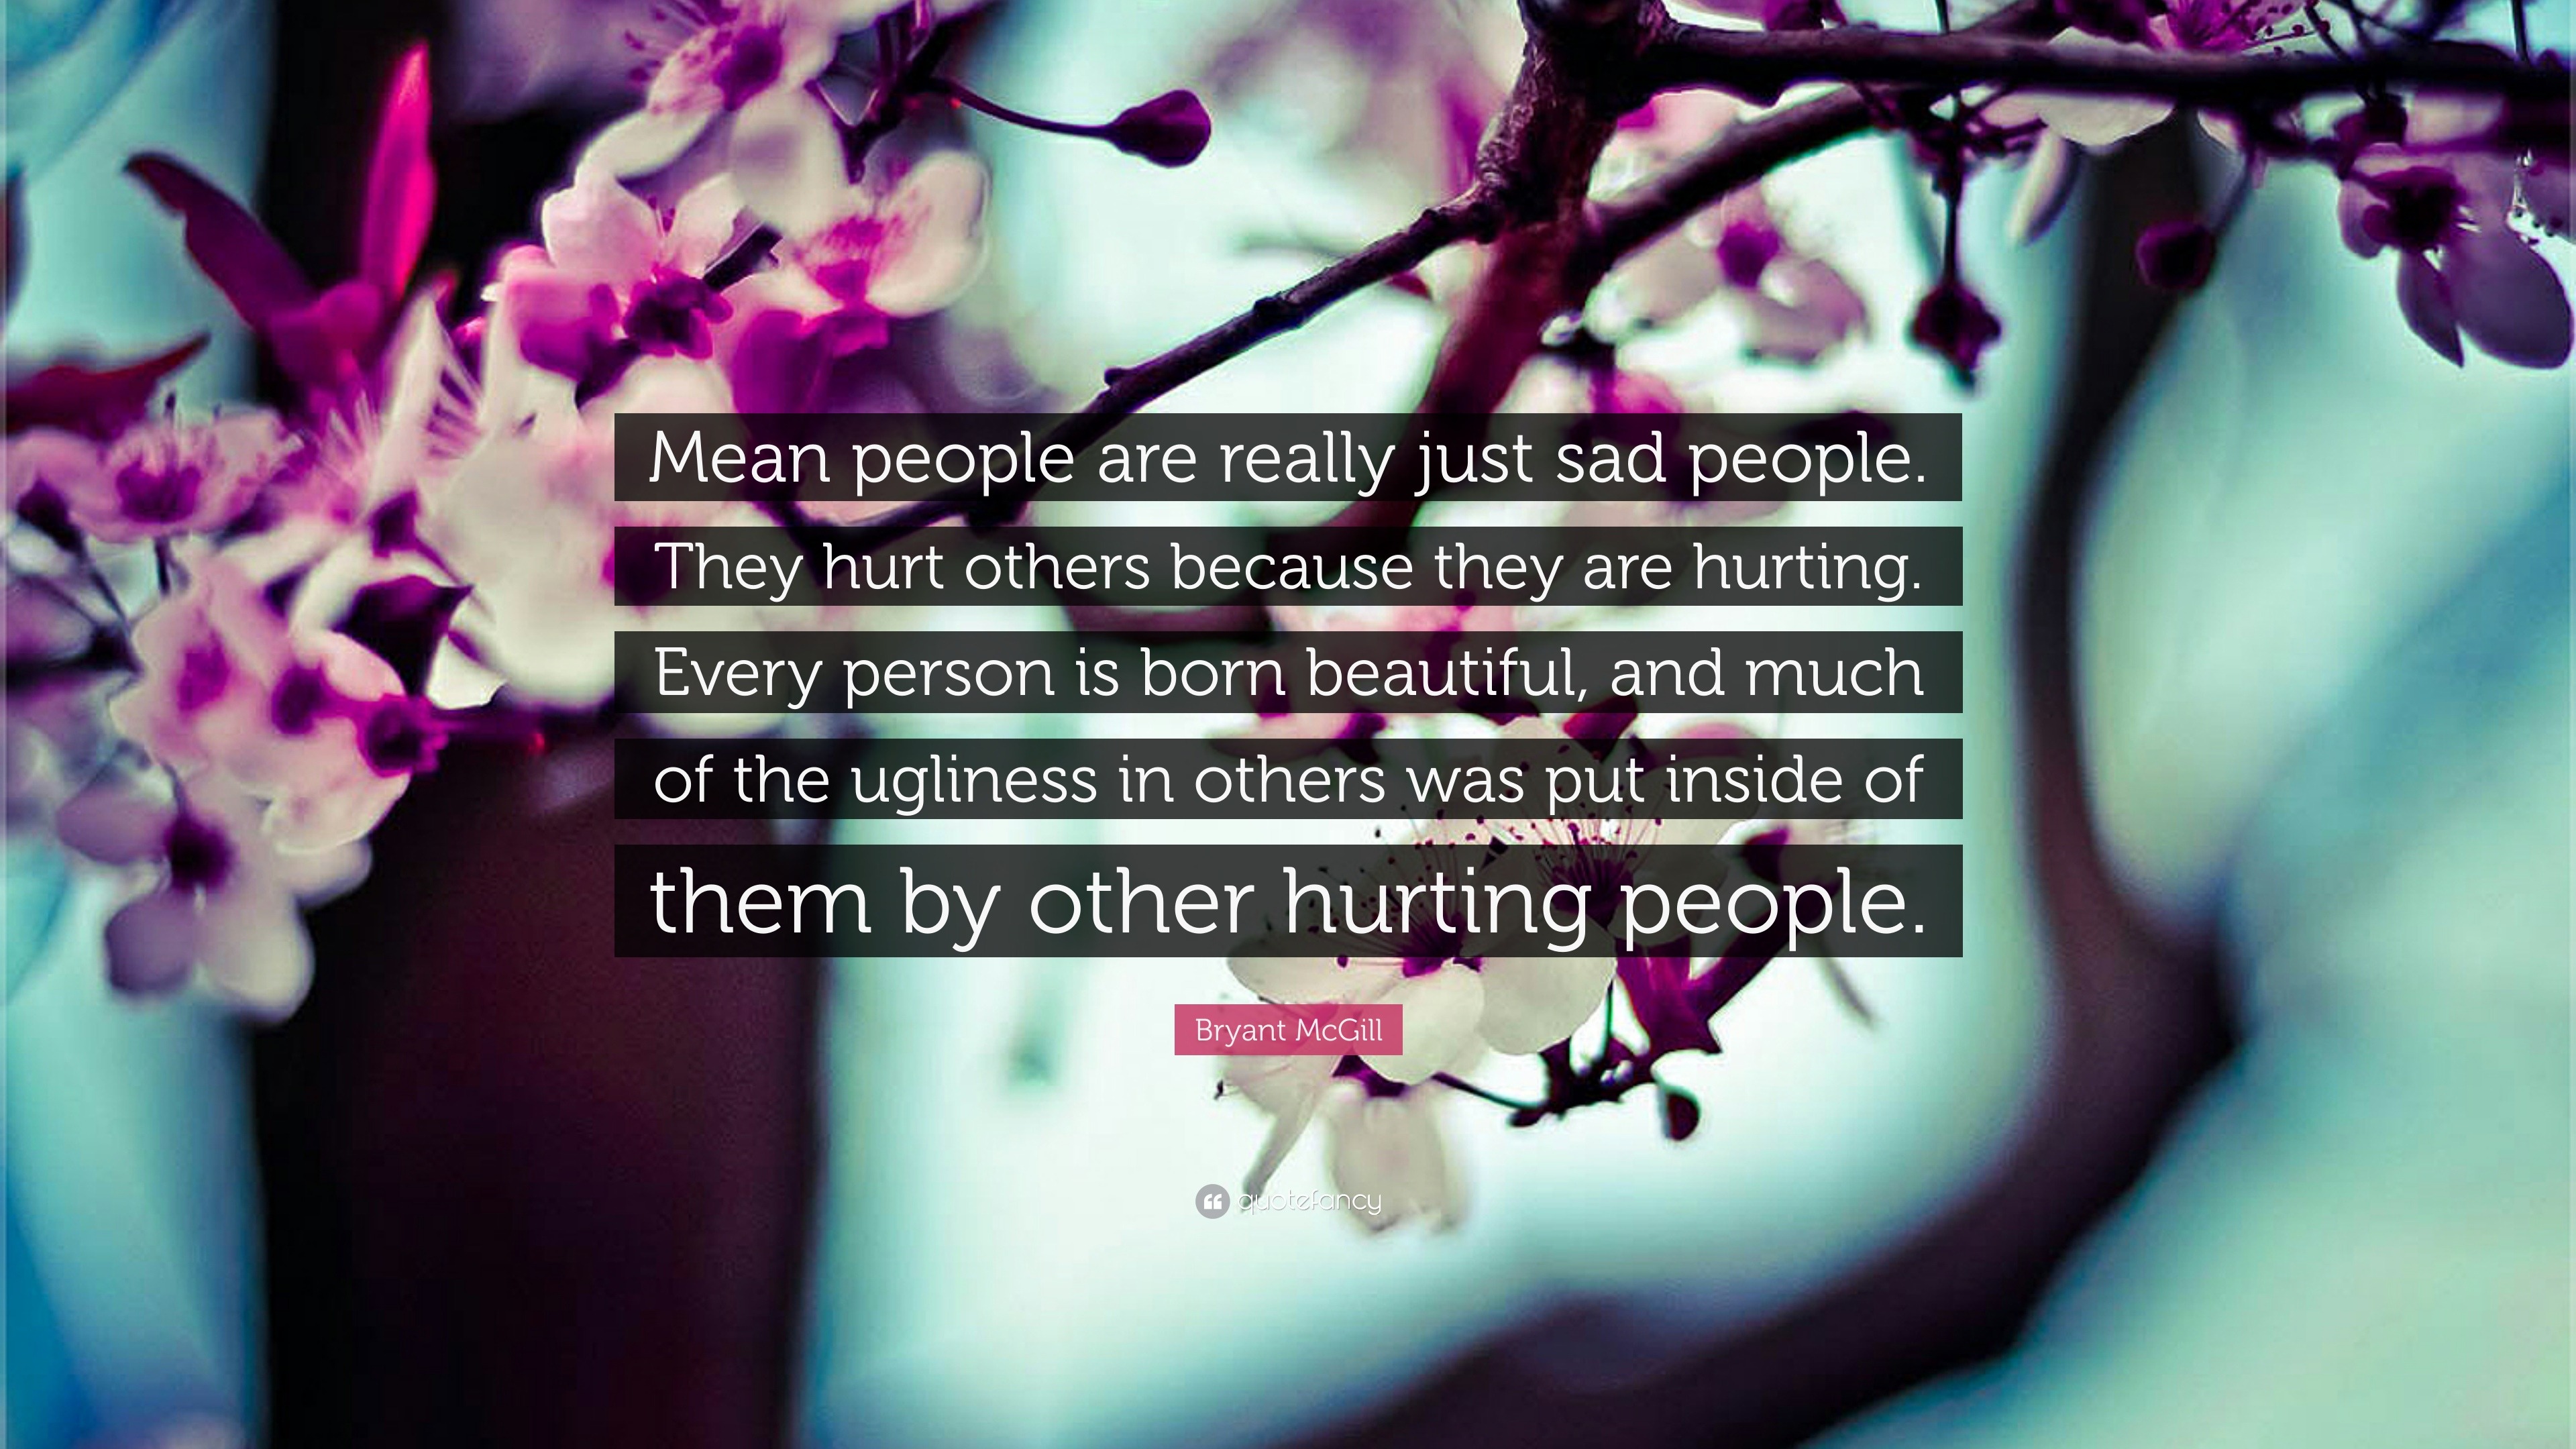 Bryant McGill Quote: “Mean people are really just sad people. They hurt ...